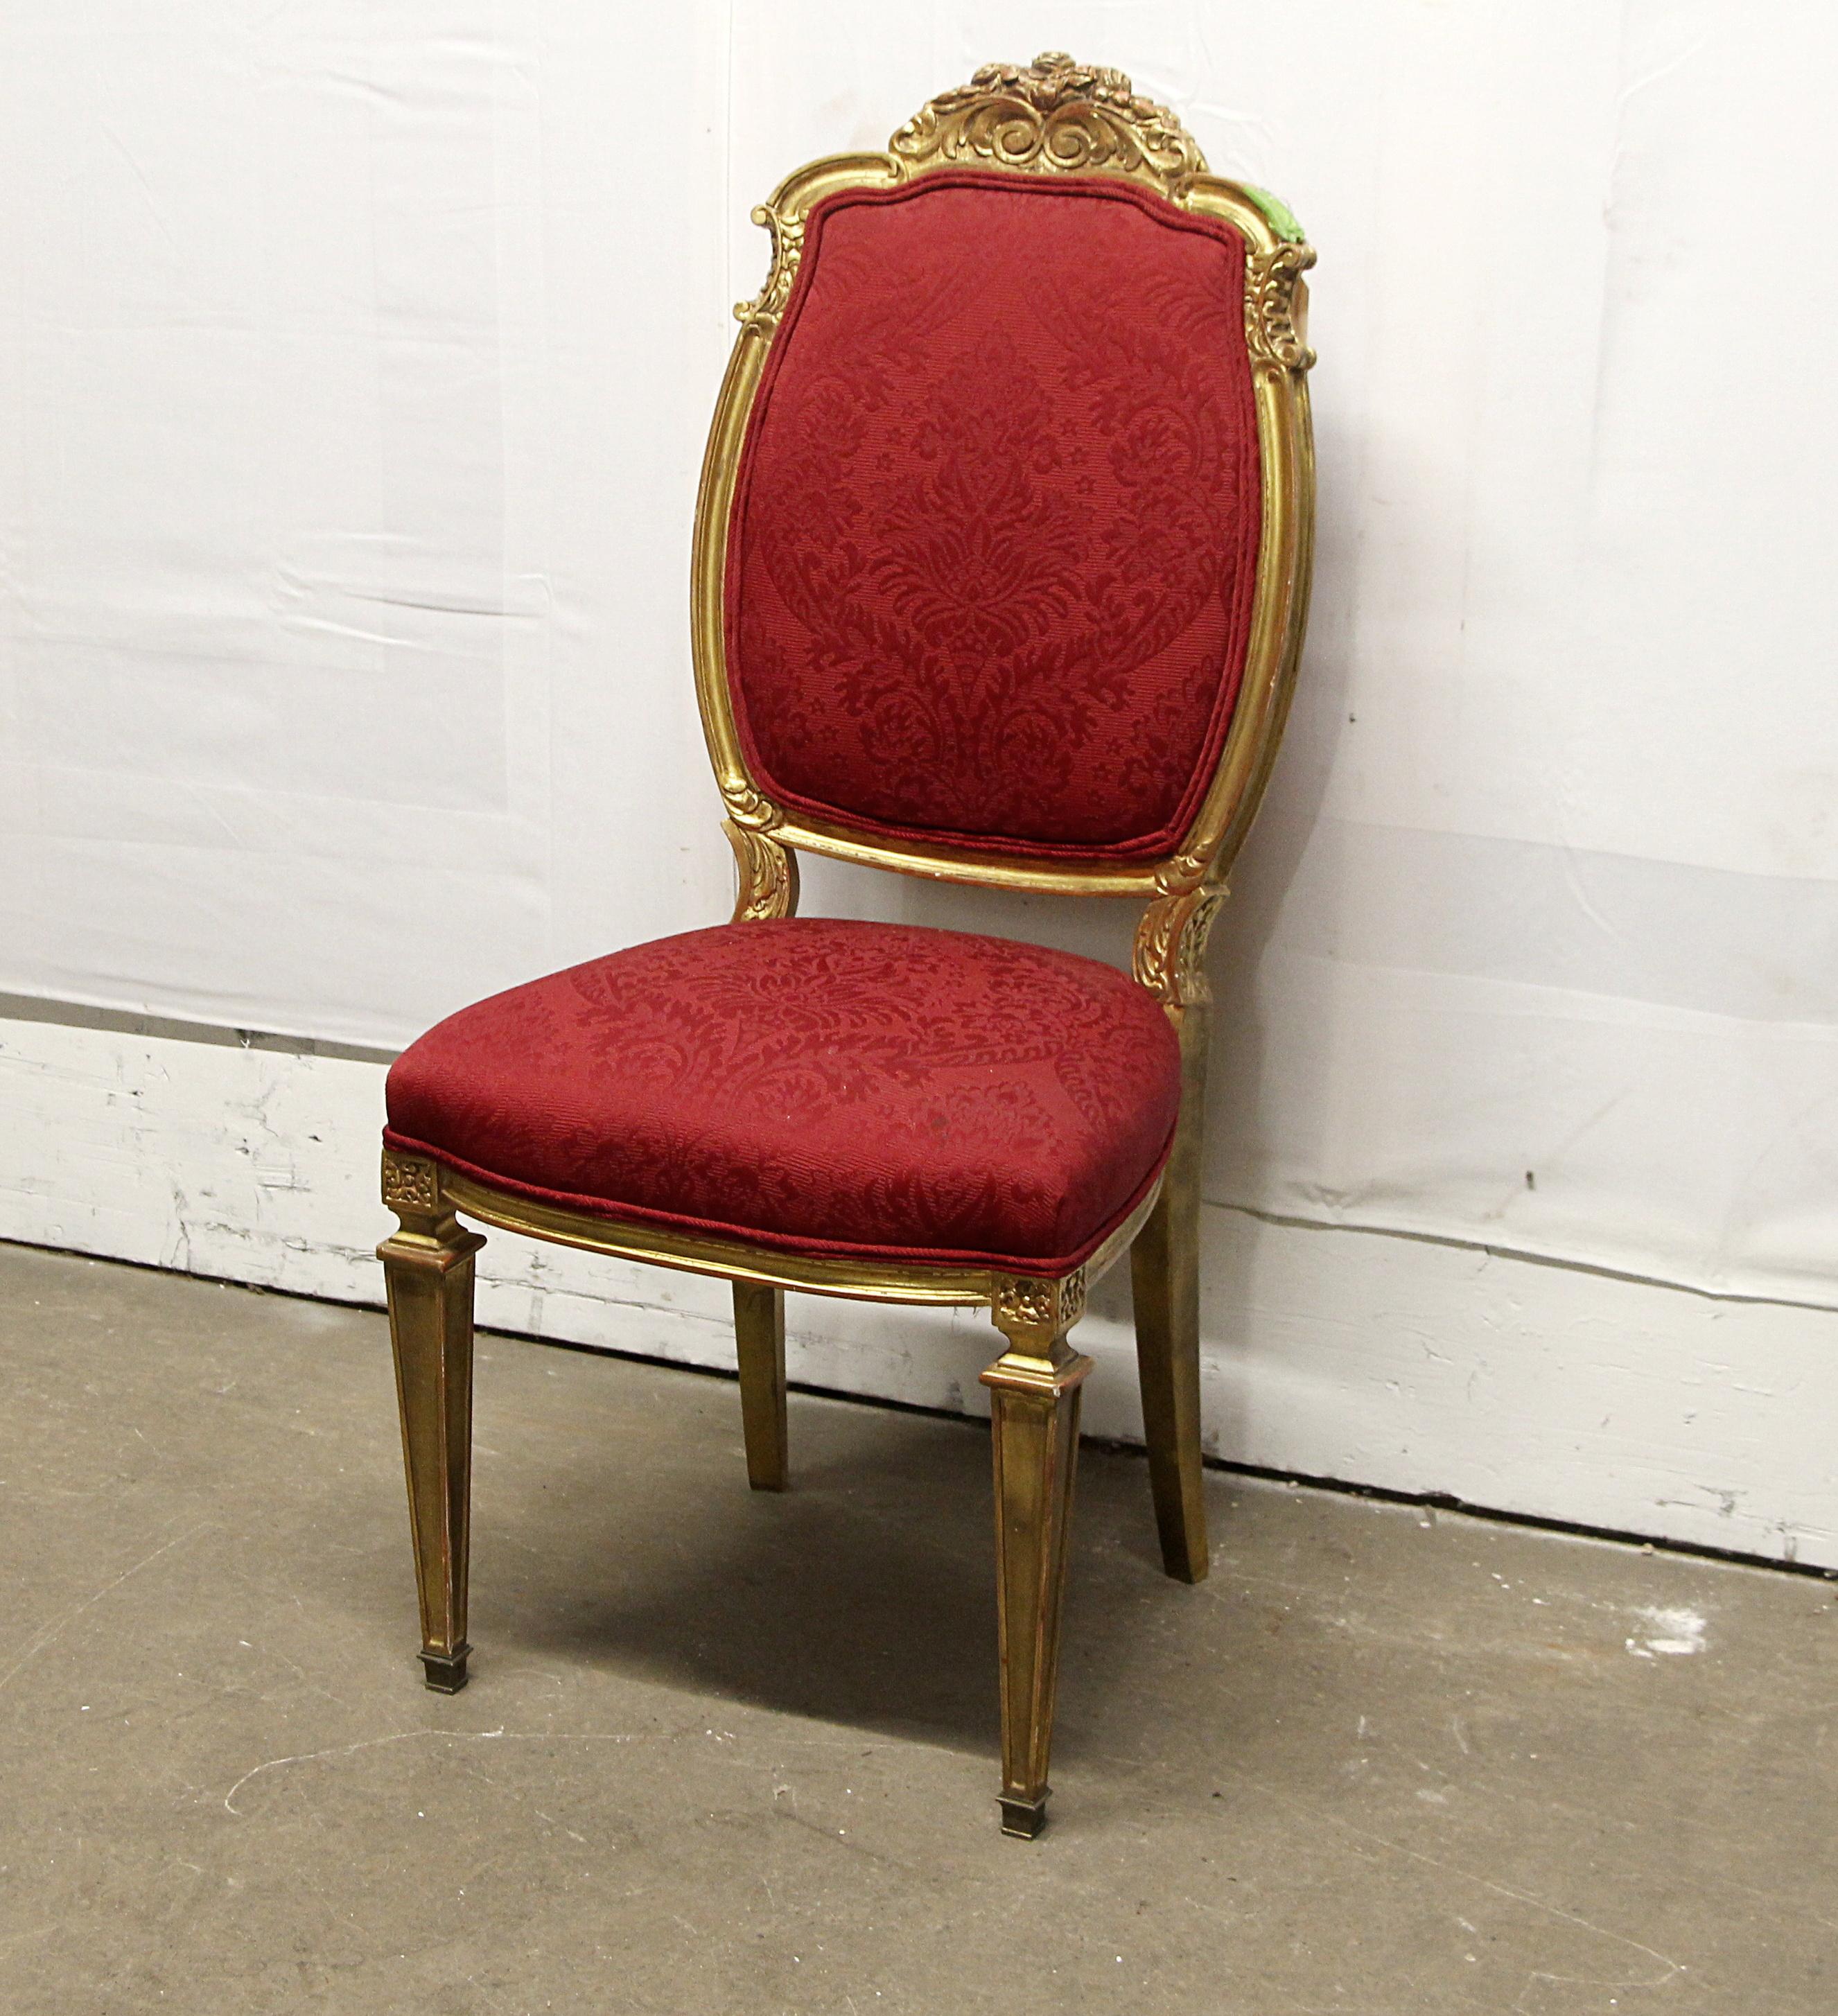 1920s French style chair with rich red floral patterned upholstery and a carved ornate gilded wood frame. There is minor wear from age and use. Please note, this item is located in our Scranton, PA location.